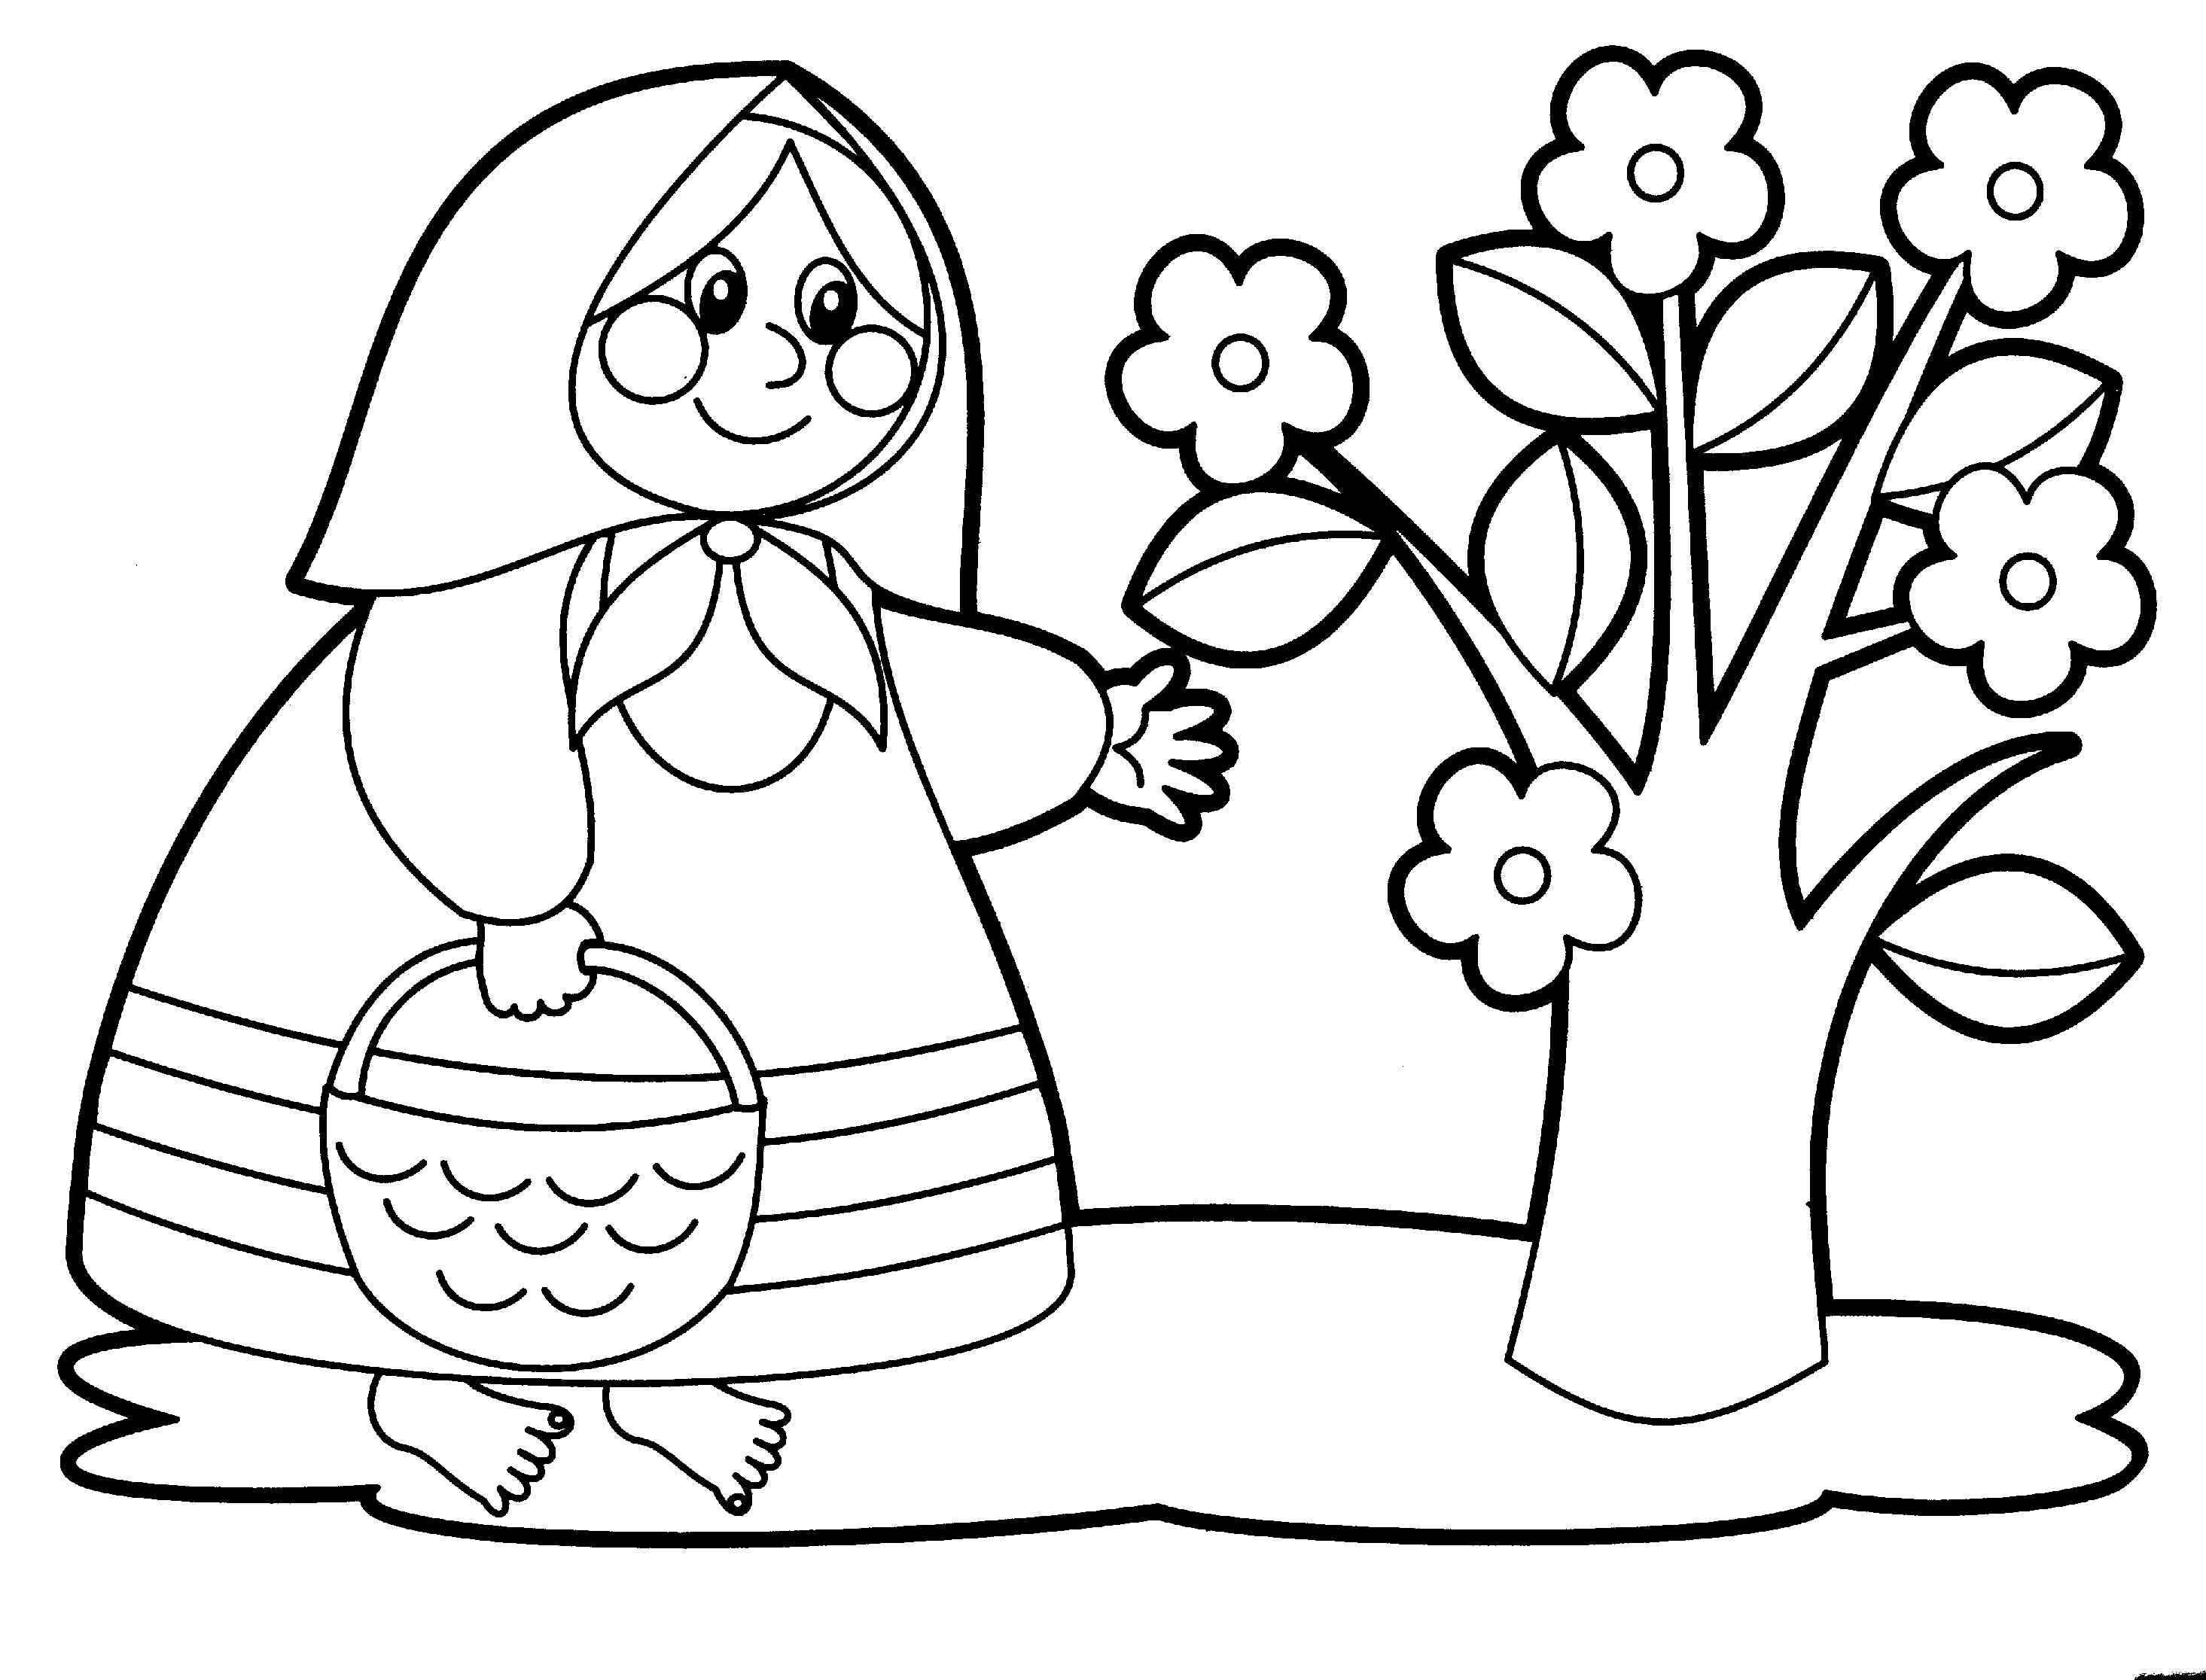 little people coloring pages - High Quality Coloring Pages